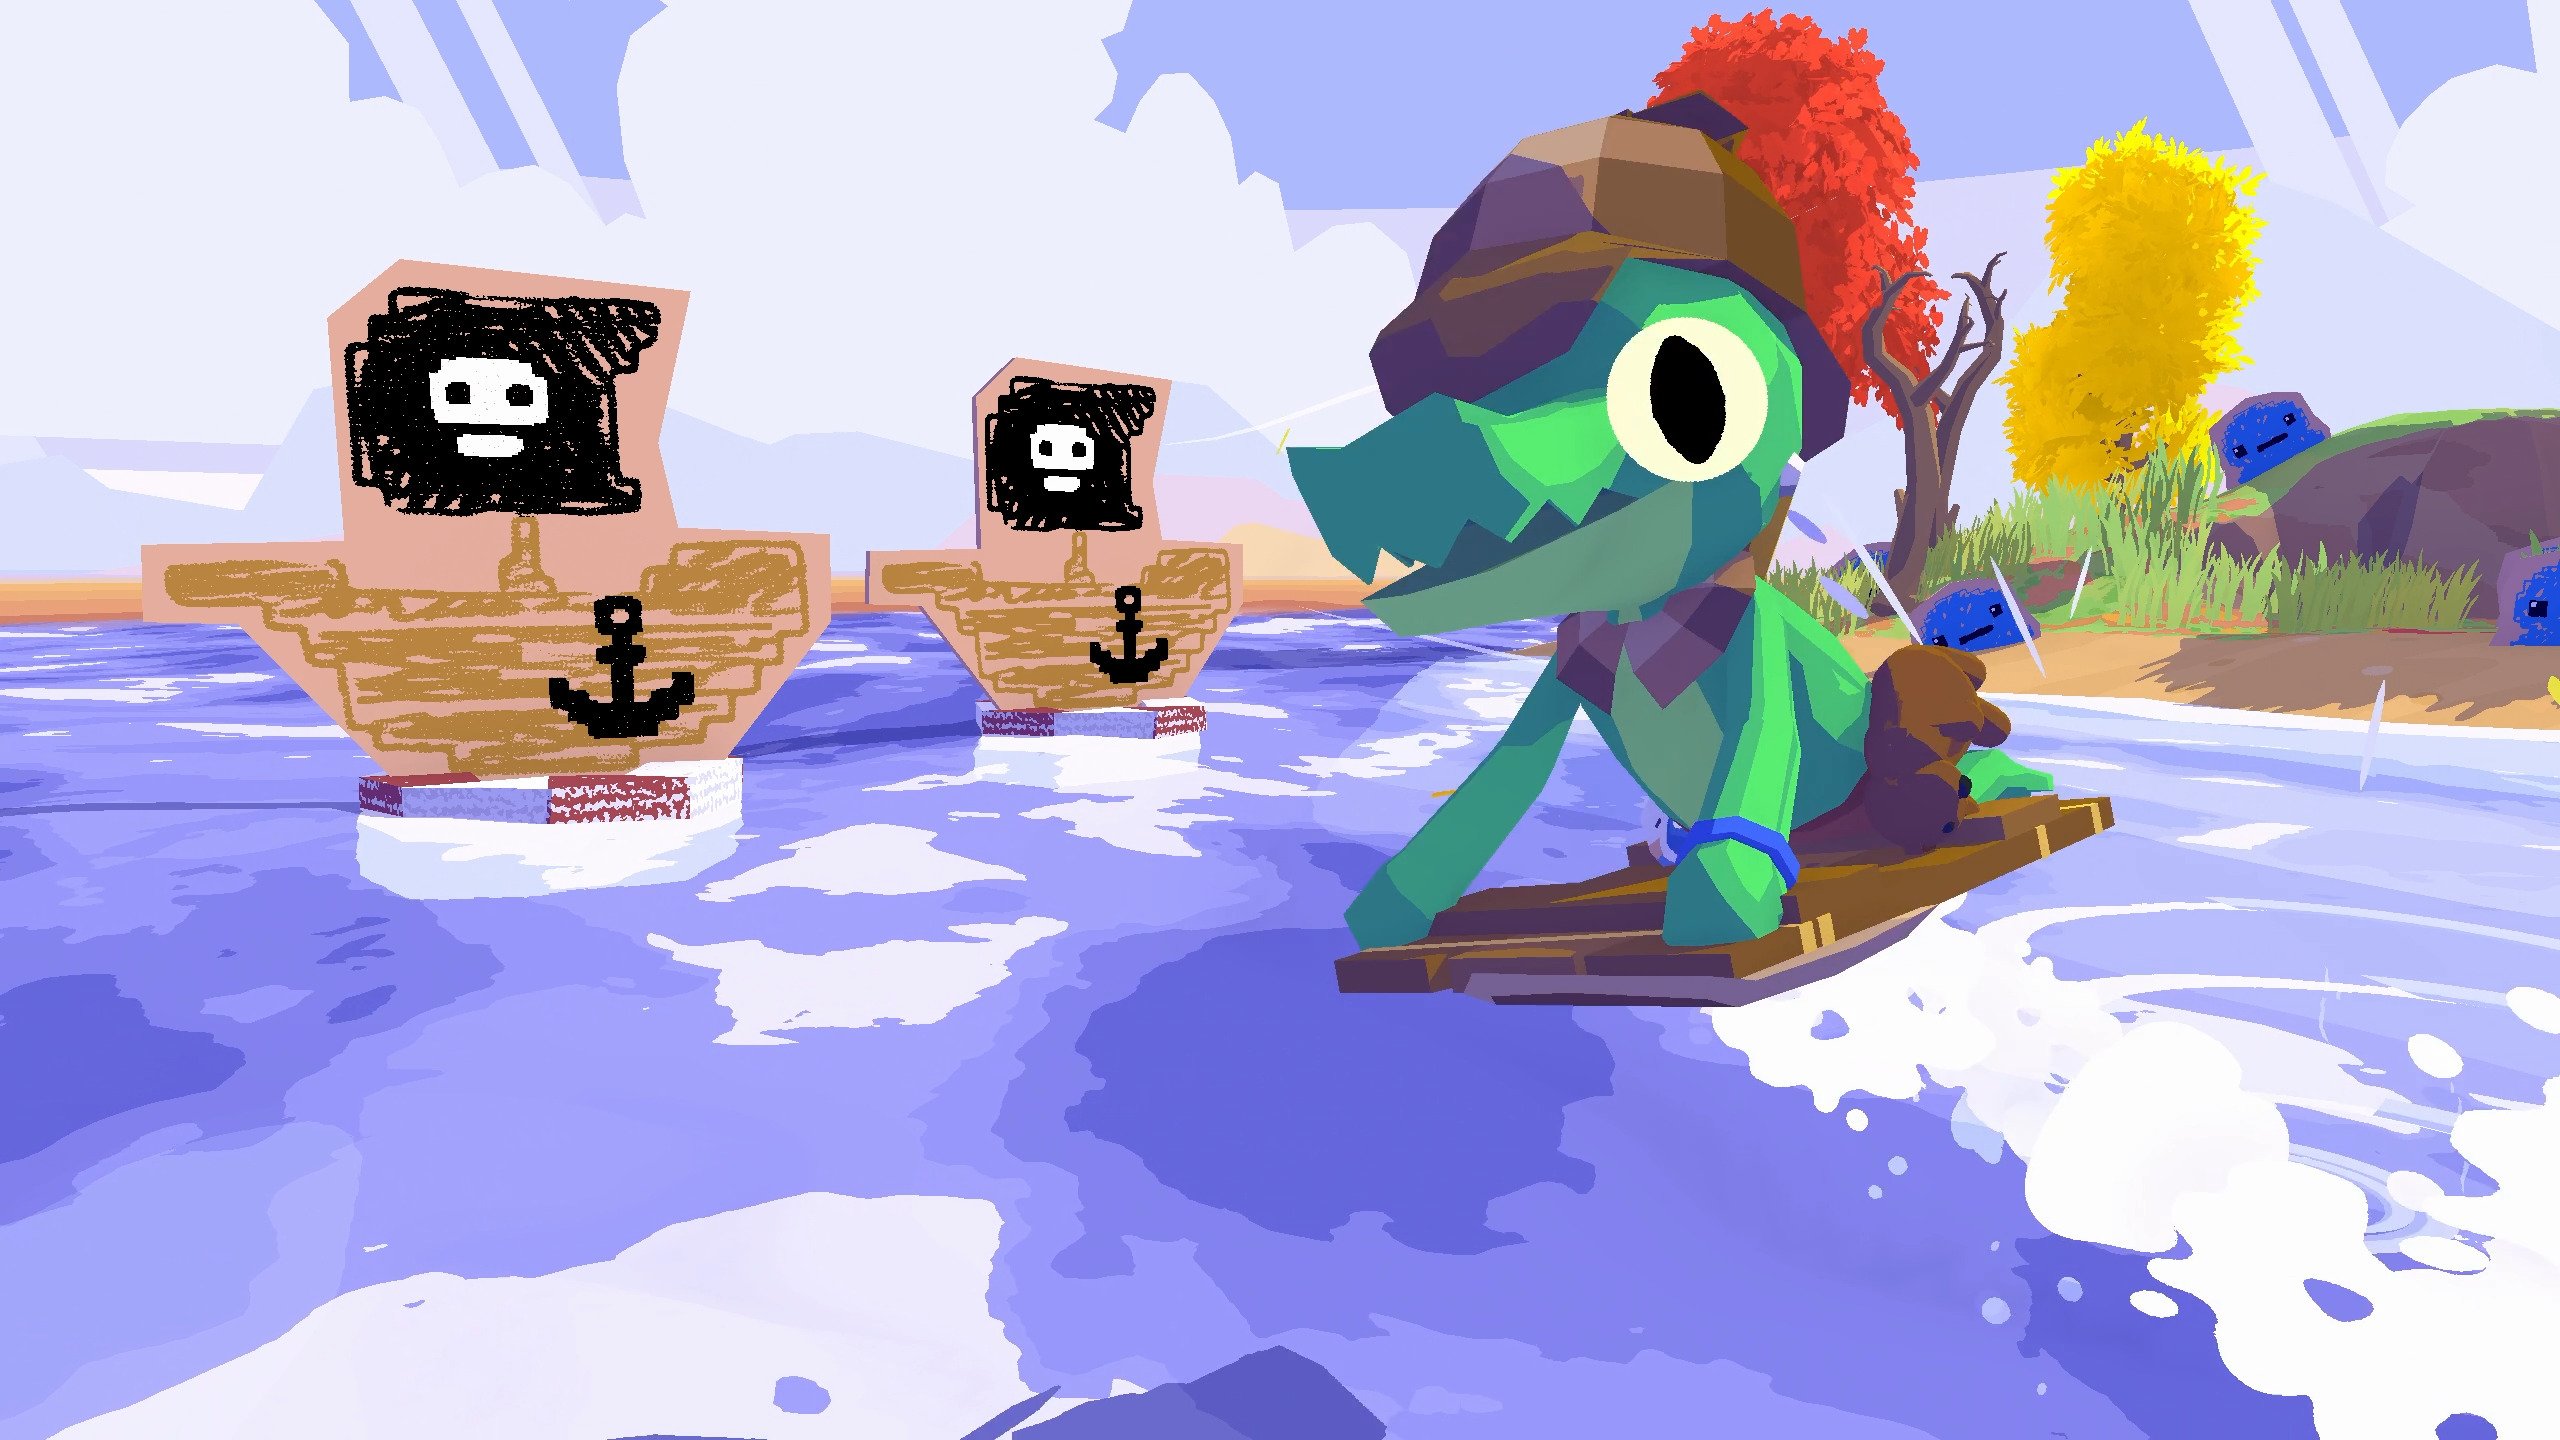 Review: Lil Gator Game is a wholesome